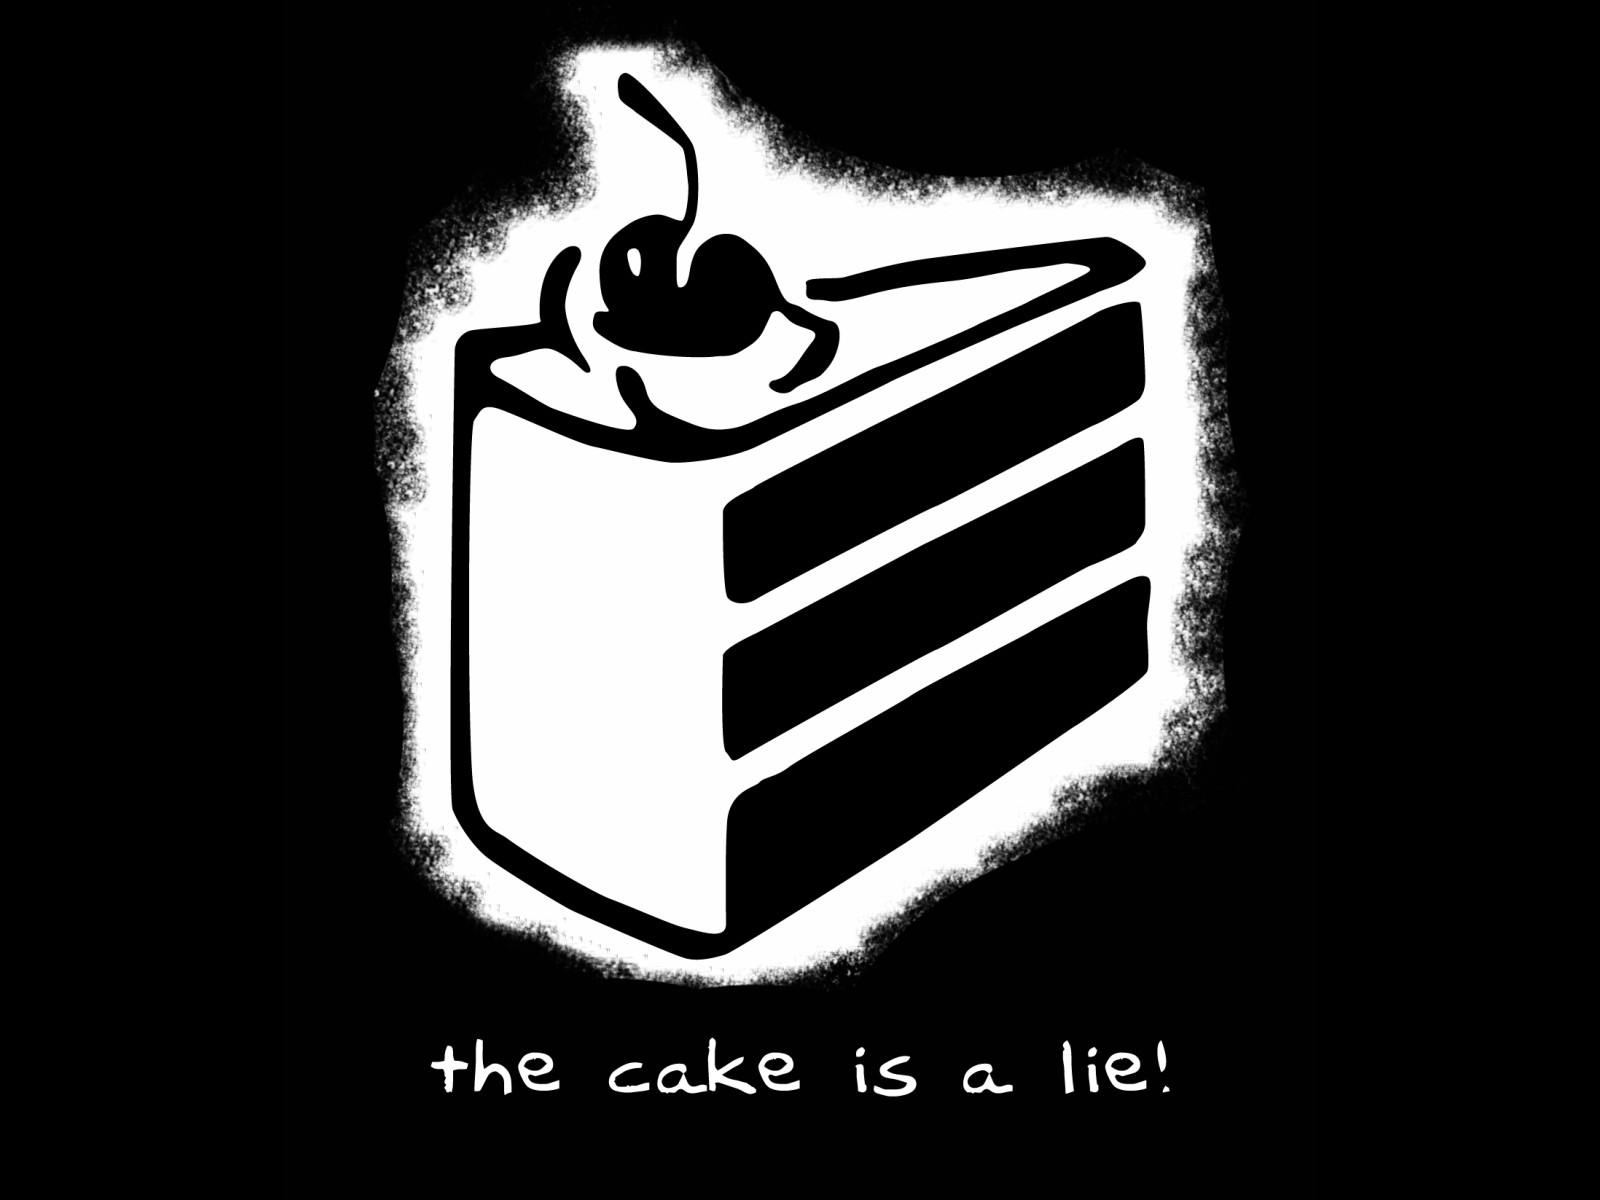 General 1600x1200 Portal (game) humor video game art video games cake monochrome food sweets PC gaming simple background black background